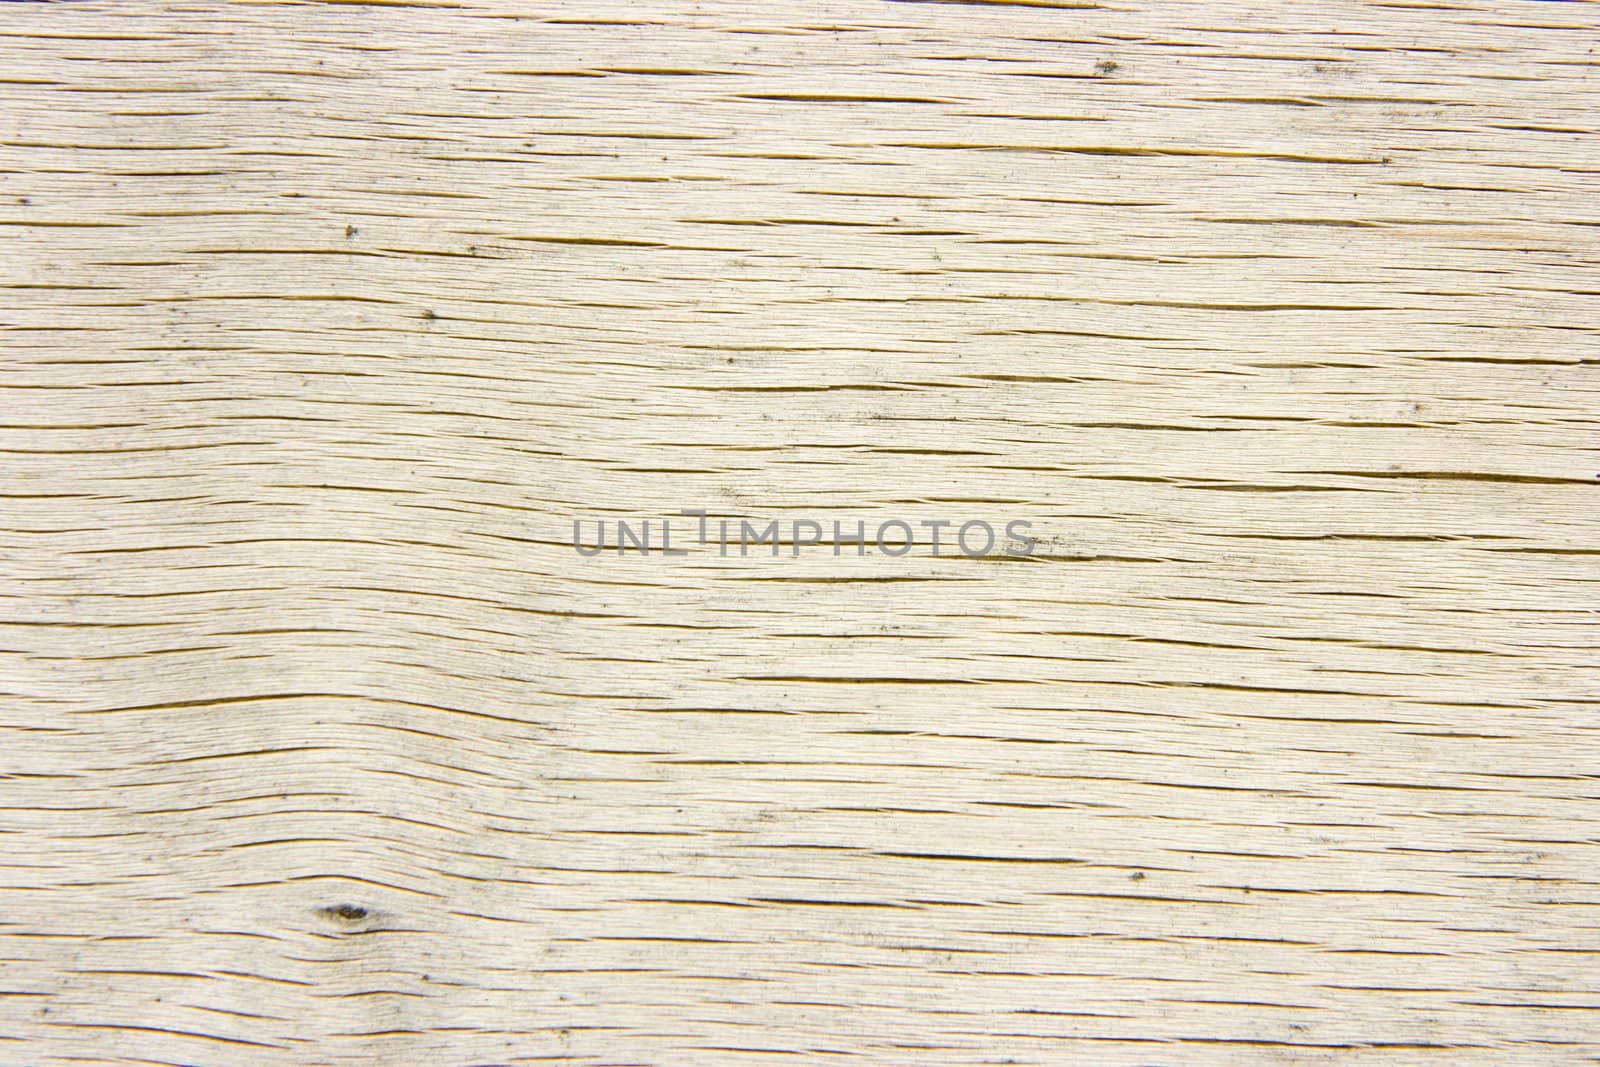 Photo of structure of a wooden surface